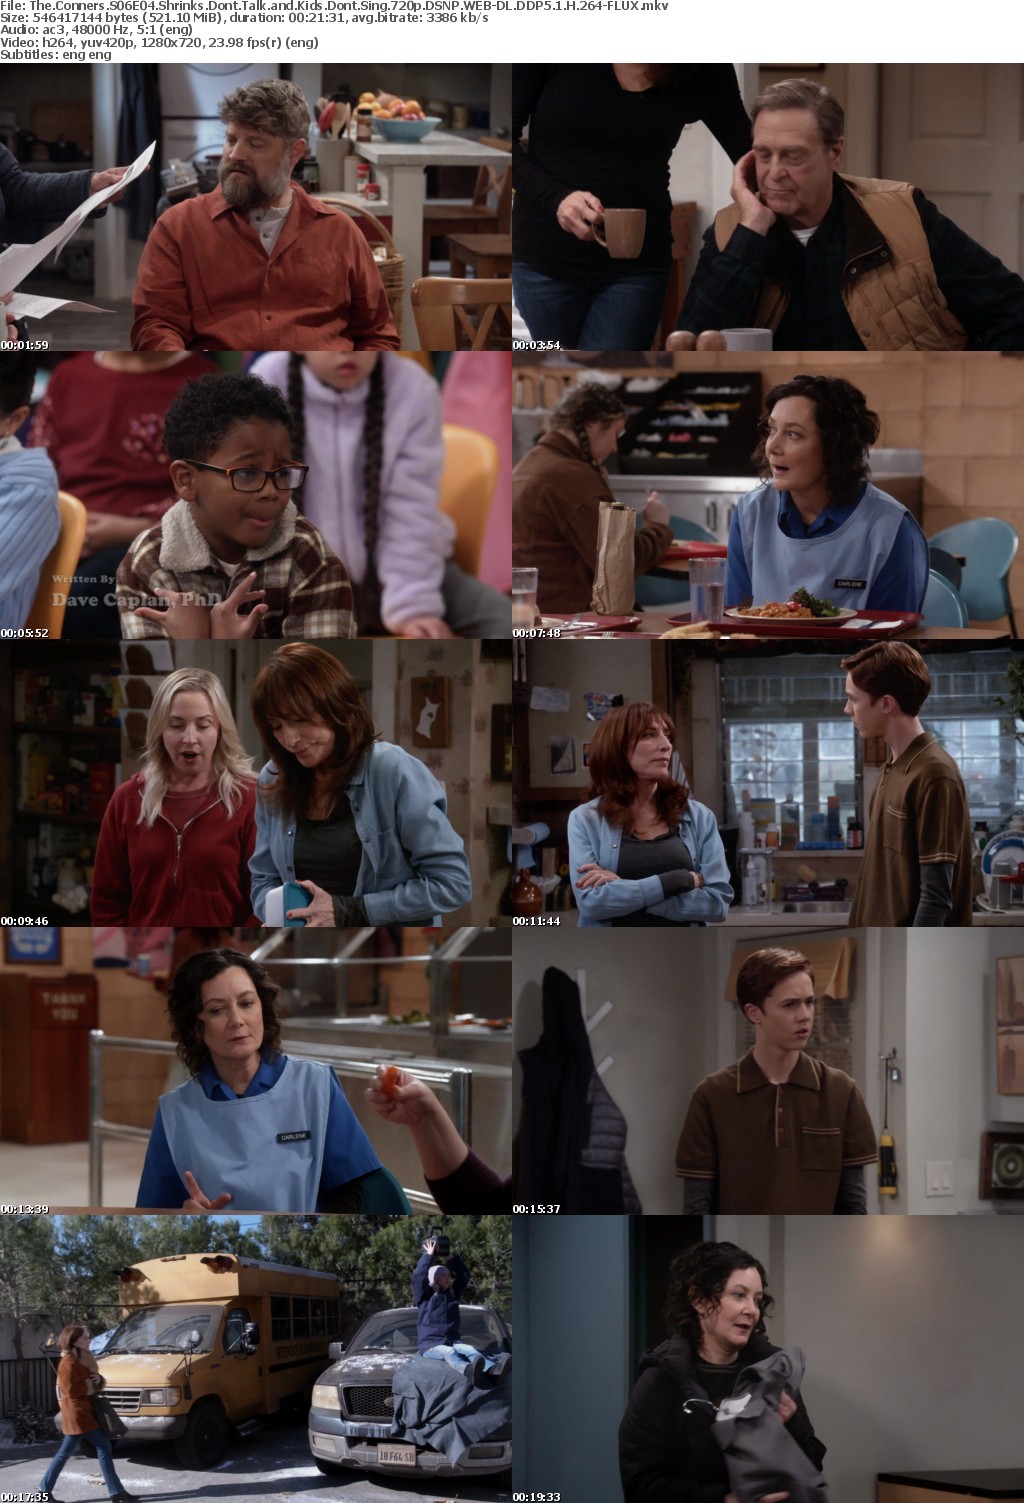 The Conners S06E04 Shrinks Dont Talk and Kids Dont Sing 720p DSNP WEB-DL DDP5 1 H 264-FLUX